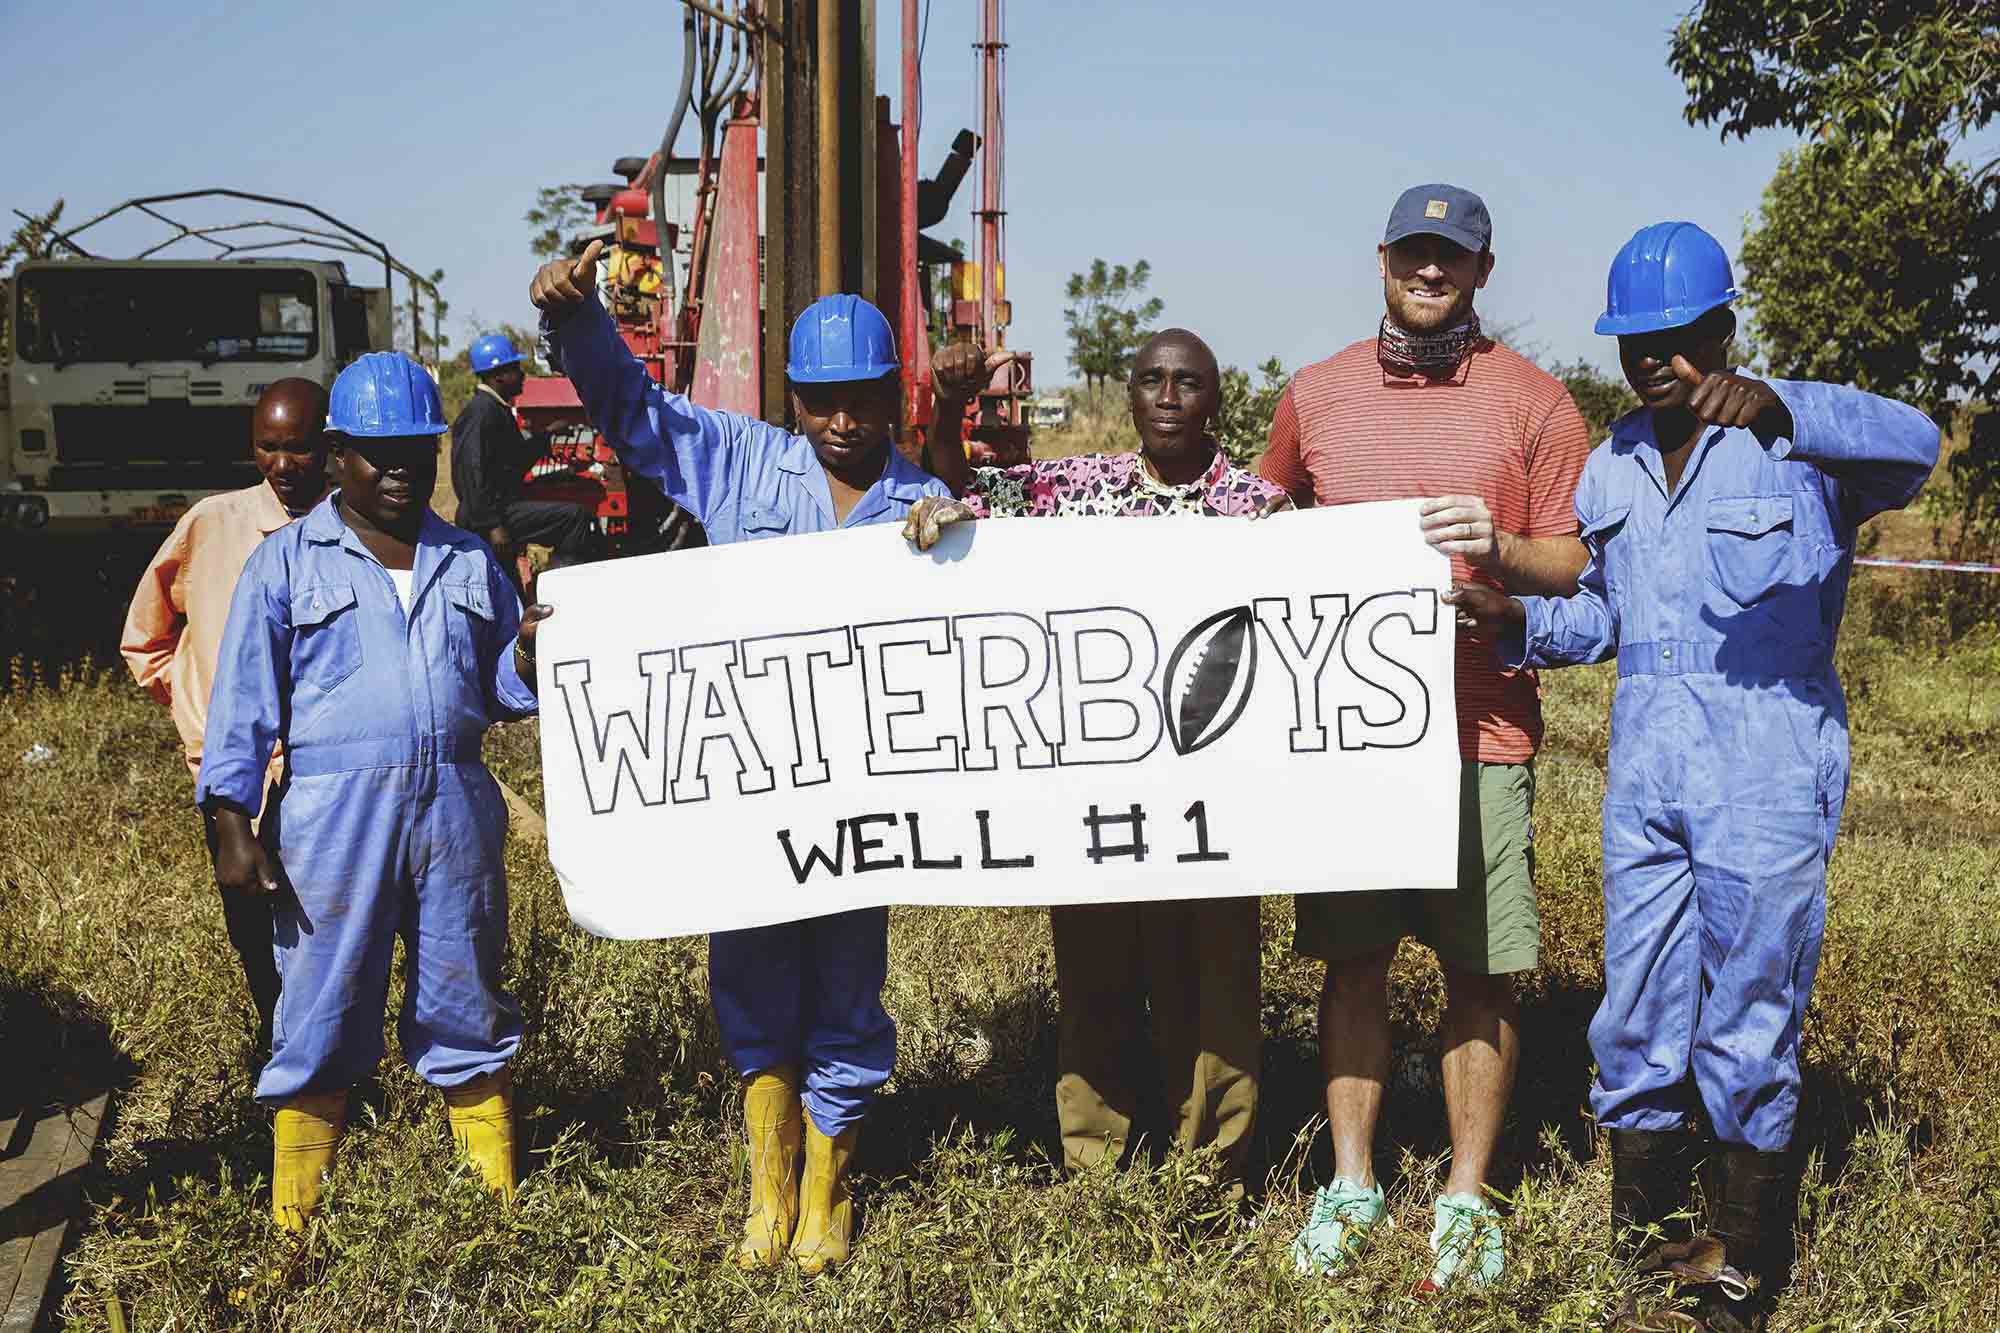 Chris Long stands with men at a well drilling site and holds a sign that reads: Waterboys well #1